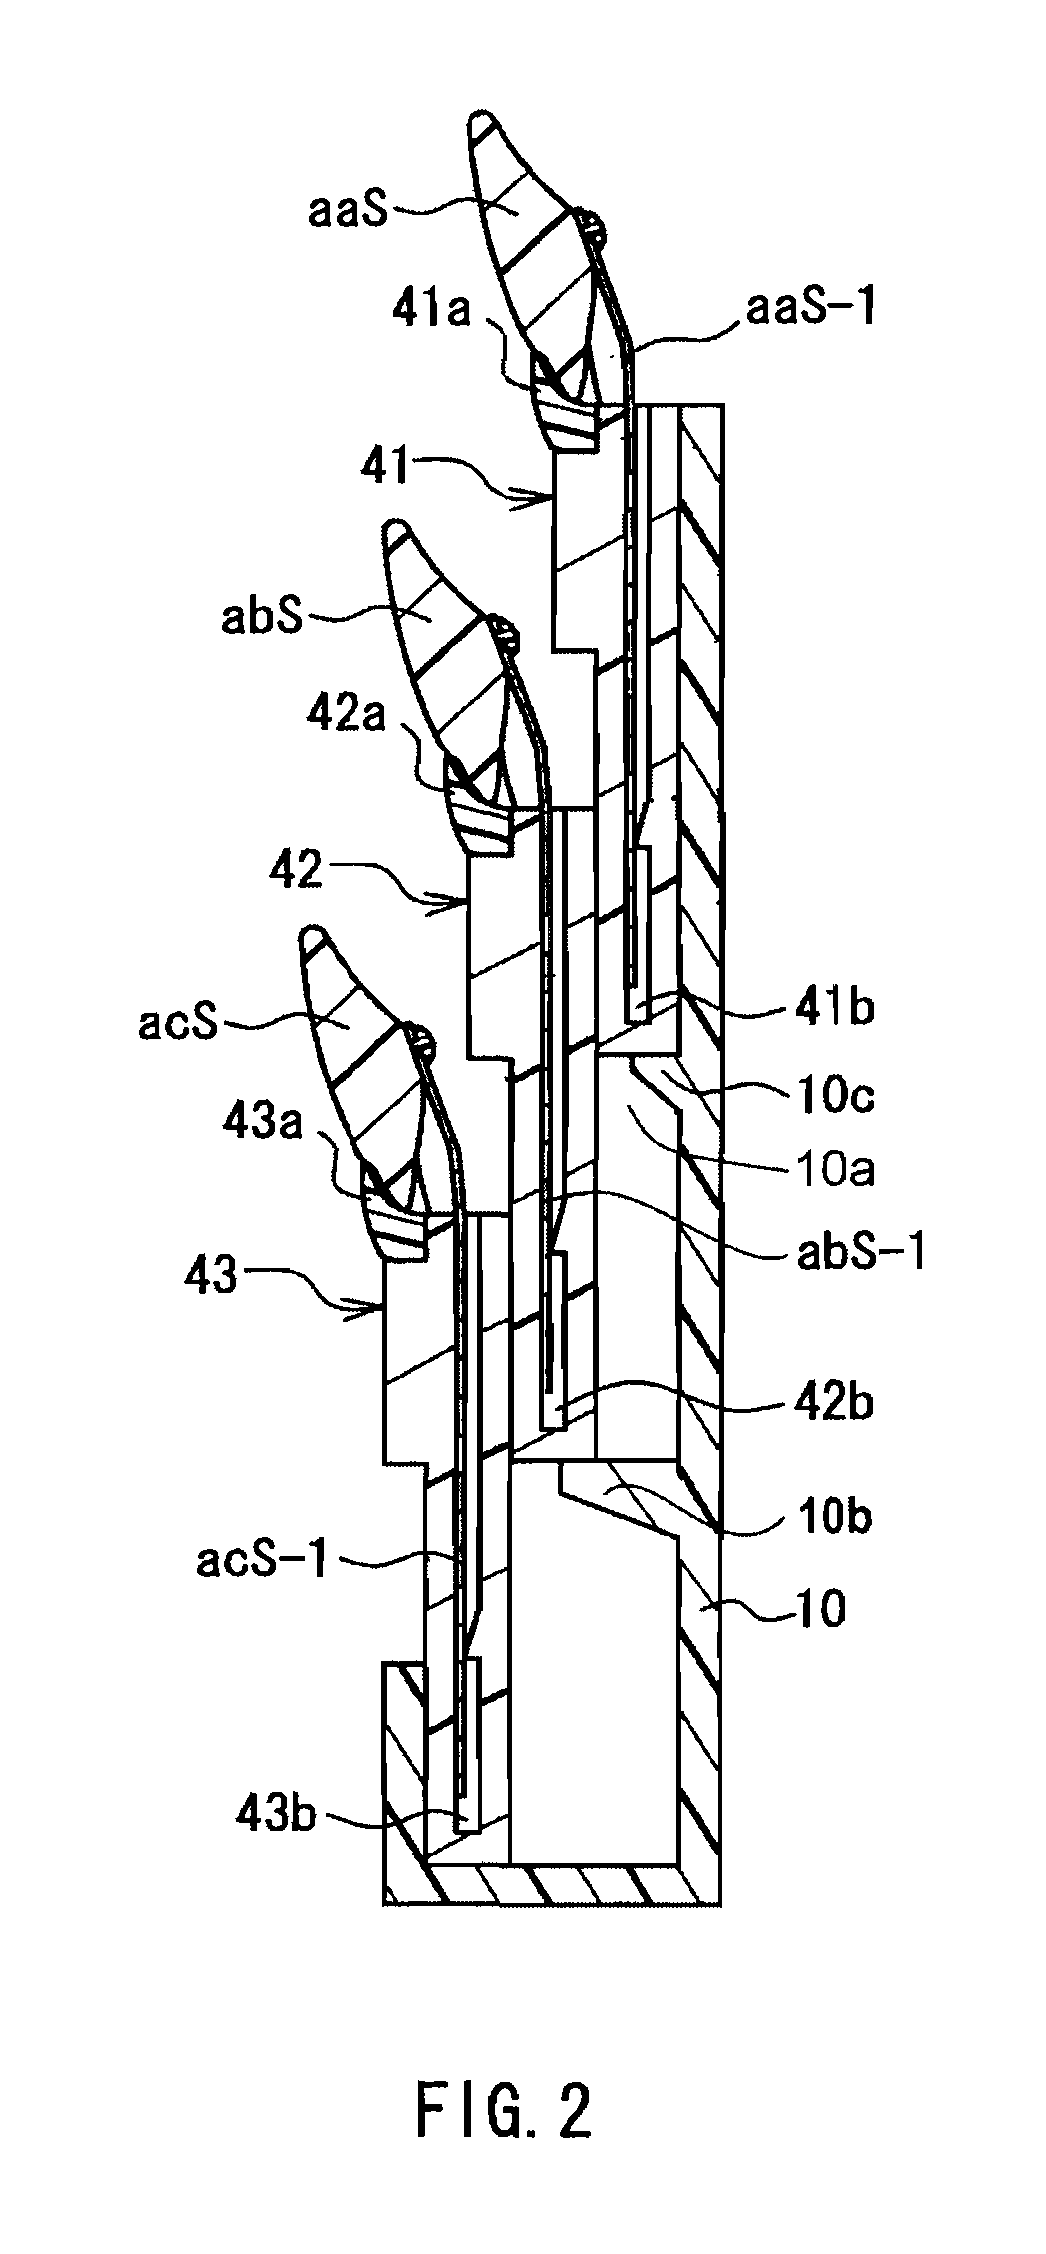 Shade guide, method for discriminating tooth colors, artificial tooth manufacturing method